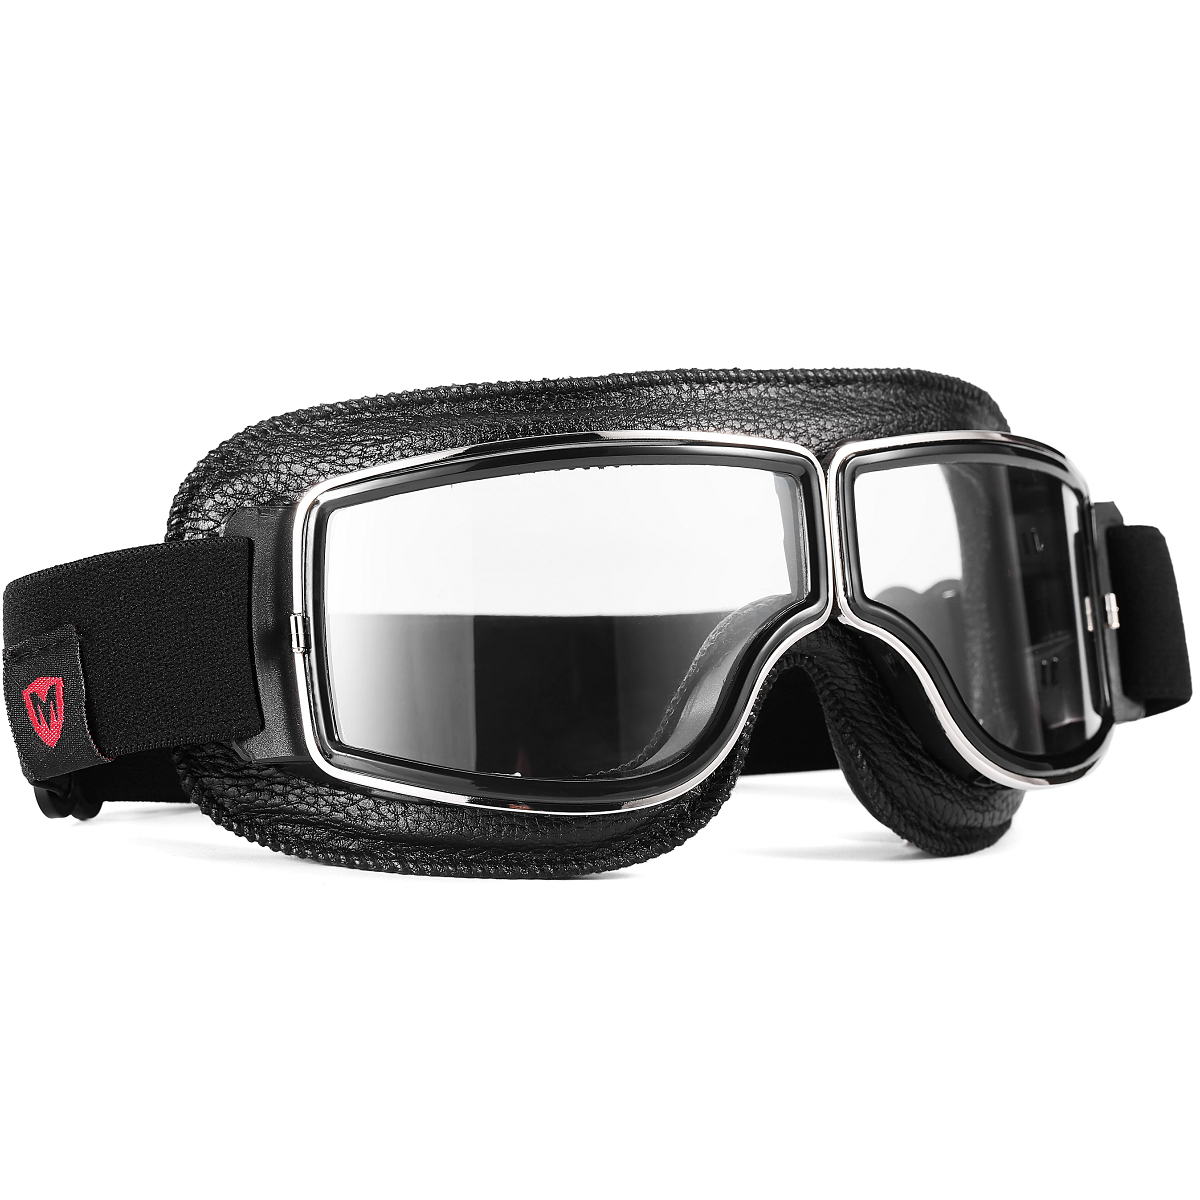 Black SILVERSTONE goggles with clear PC lenses